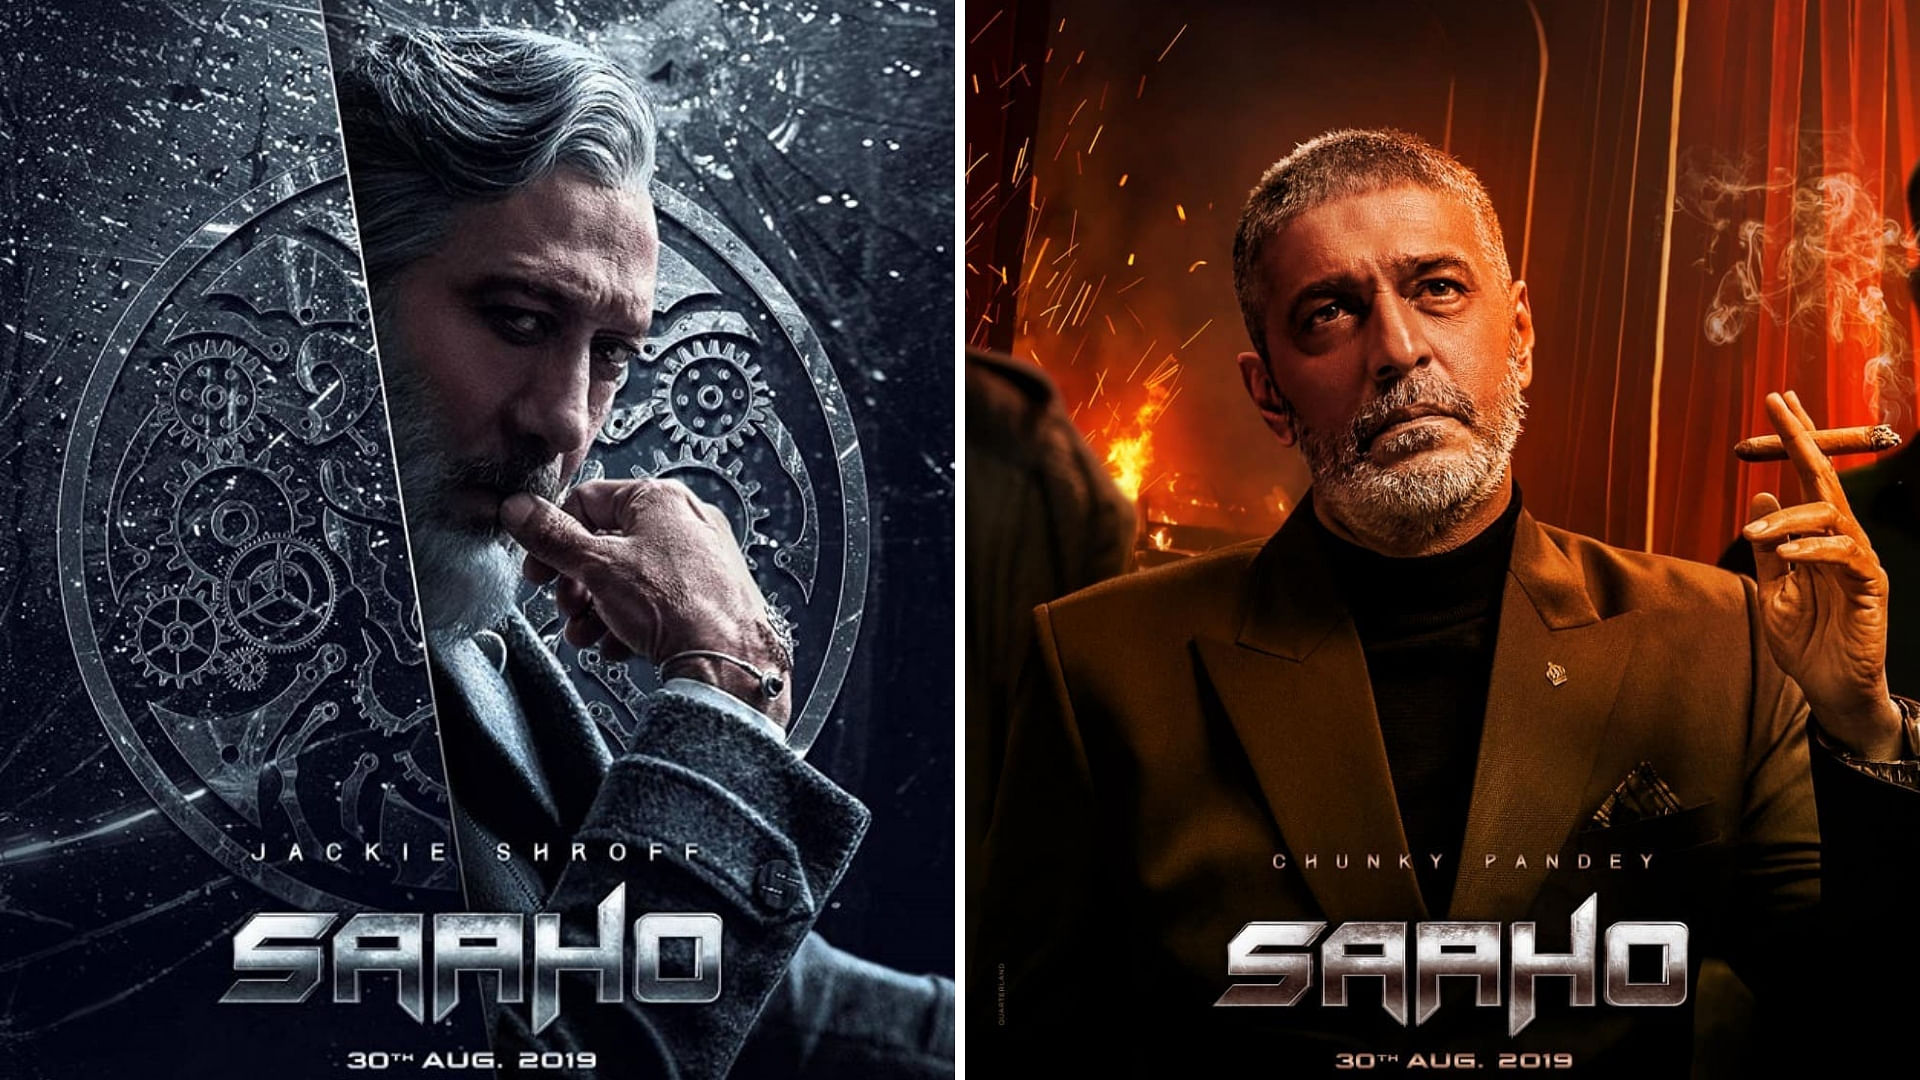 Jackie Shroff and Chunky Panday in posters for Saaho.